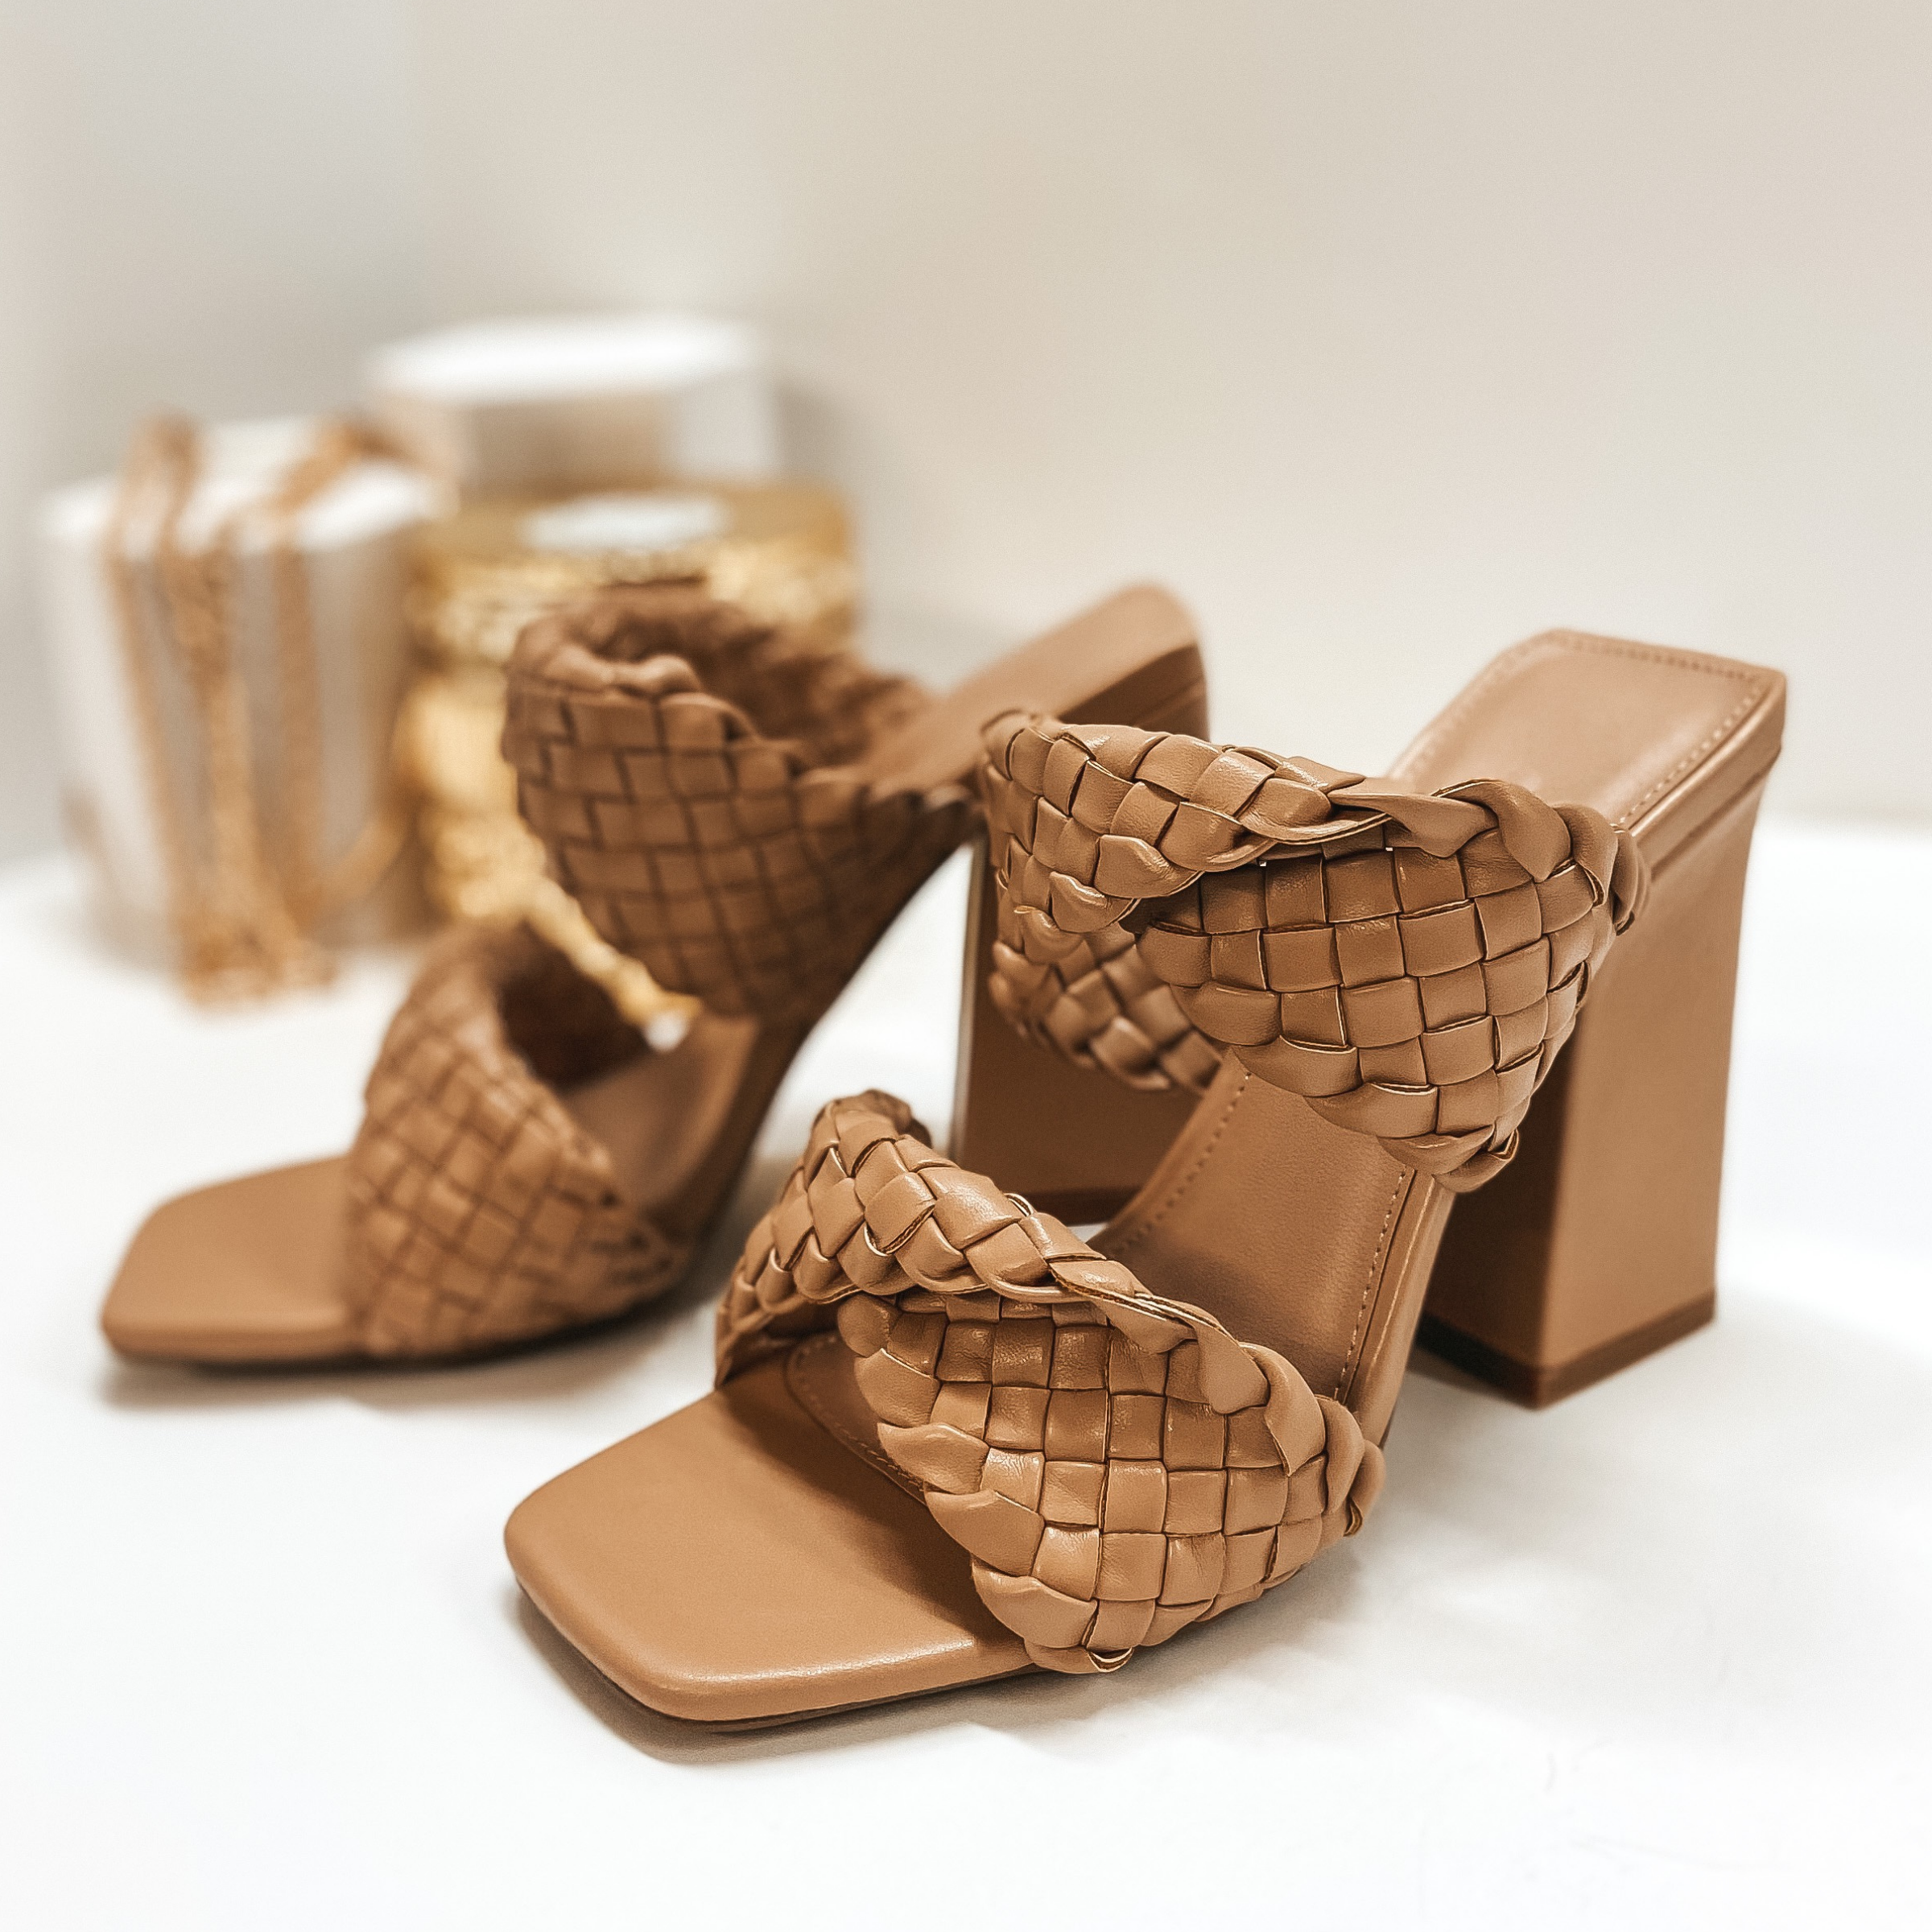 Giving Hope Braided Twist Block Heels in Tan - Giddy Up Glamour Boutique